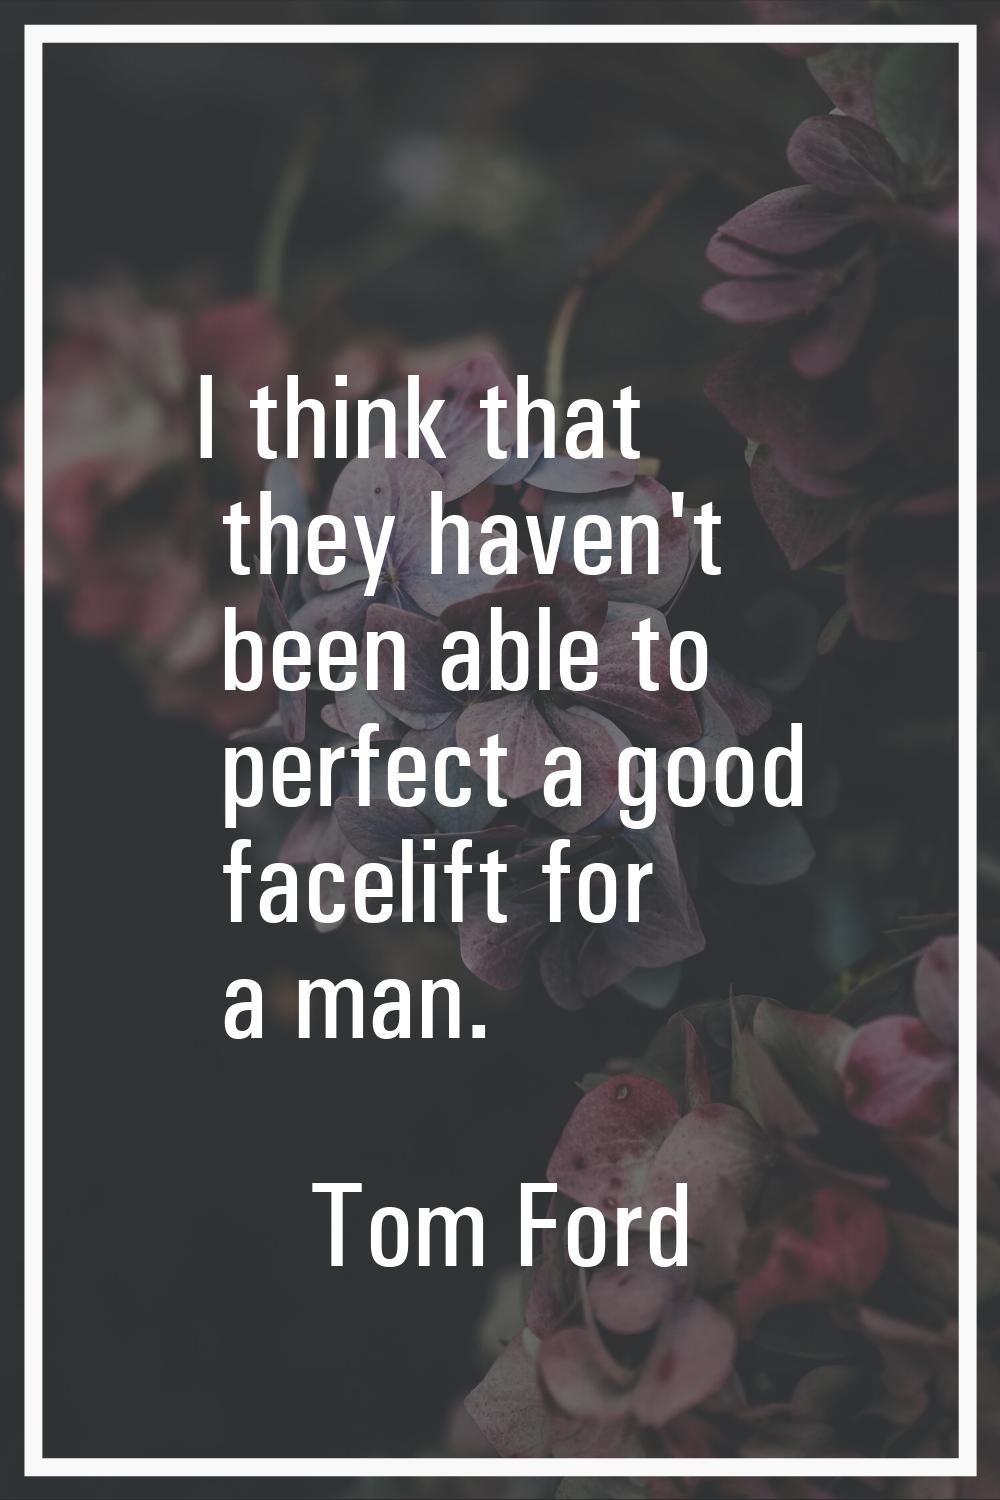 I think that they haven't been able to perfect a good facelift for a man.